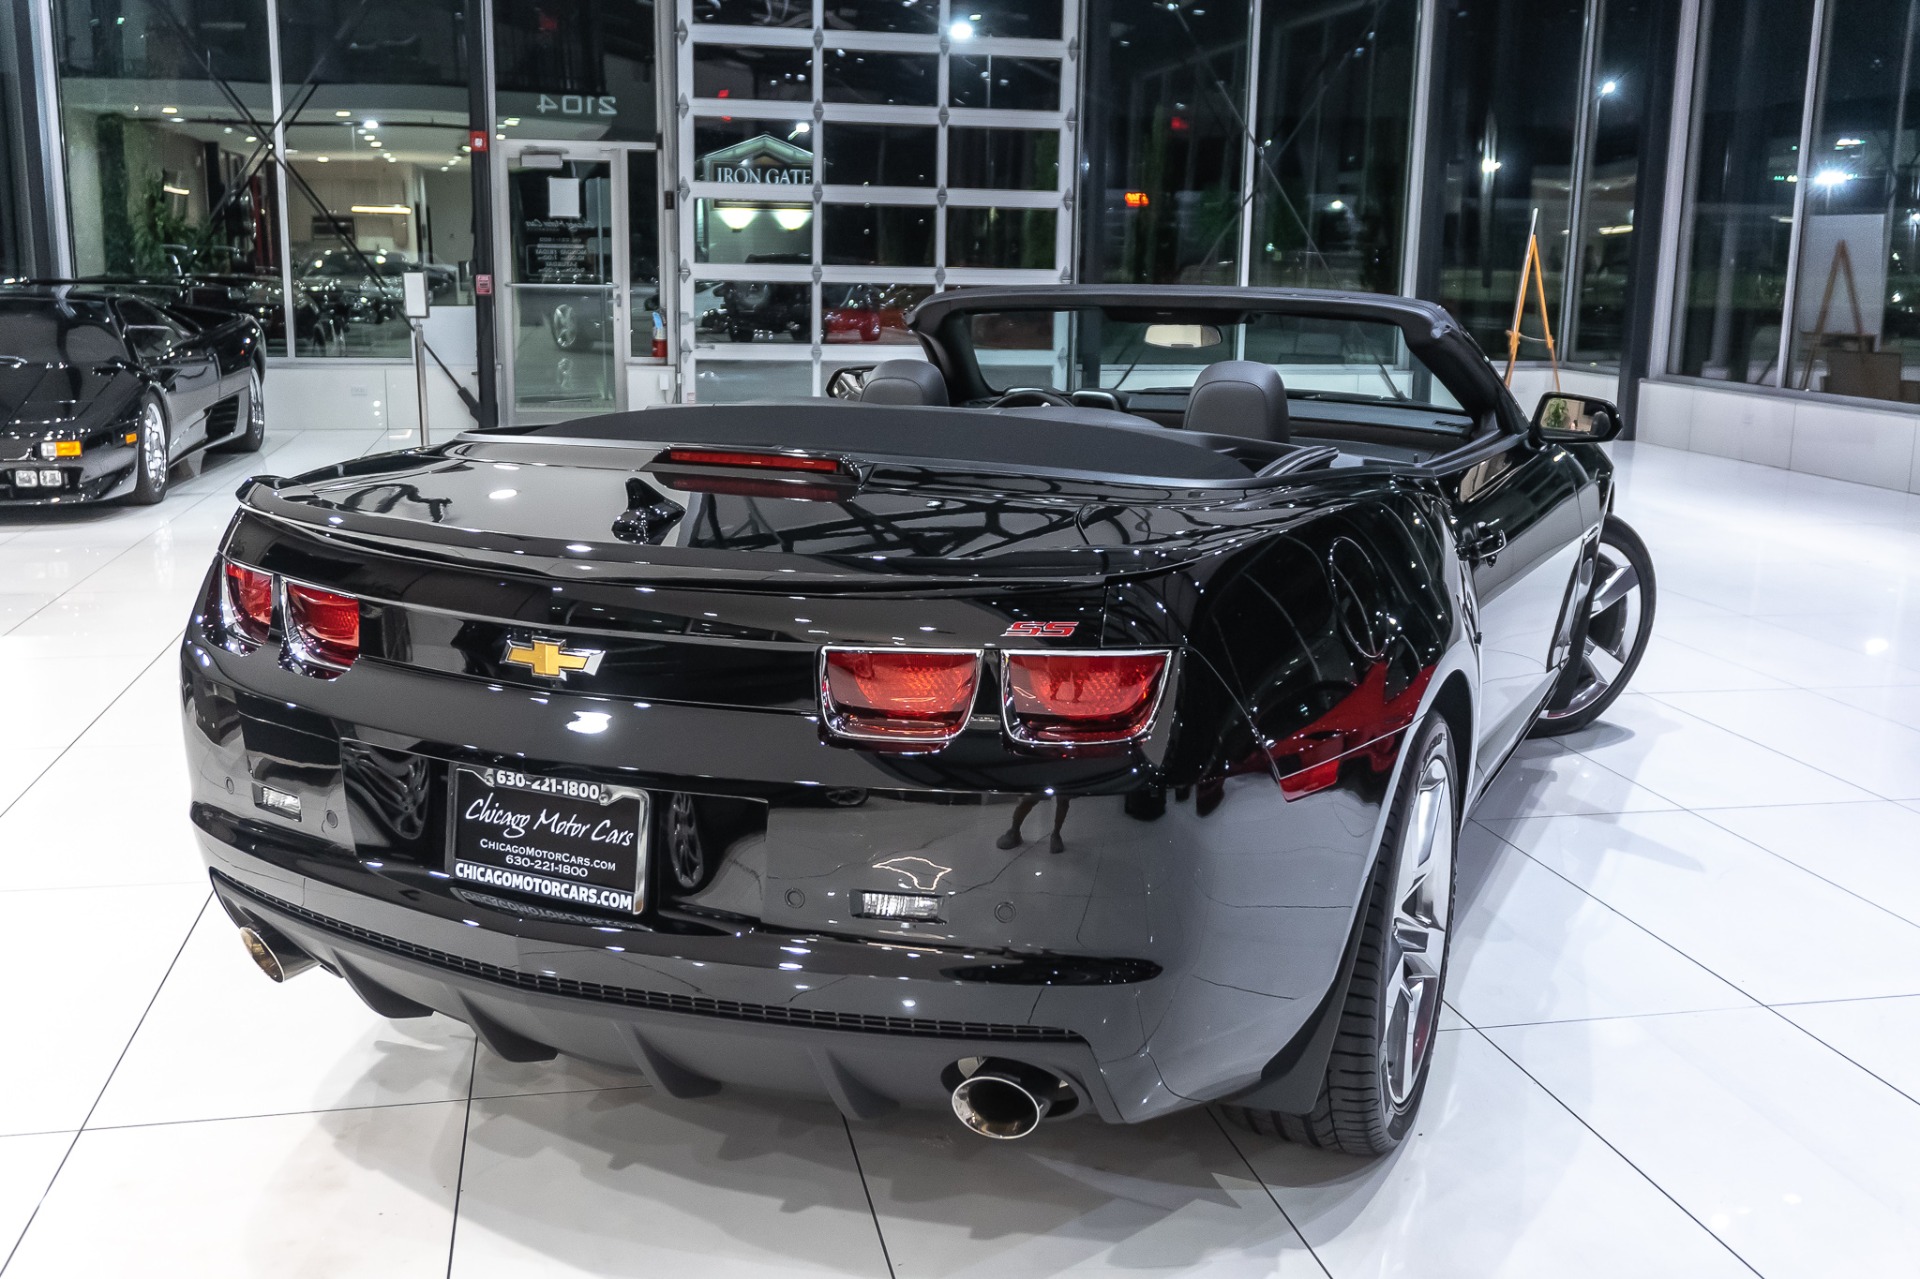 Used-2013-Chevrolet-Camaro-SS-Convertible-BACK-UP-CAMERA-ONLY-2K-MILES-PRISTINE-CONDITION